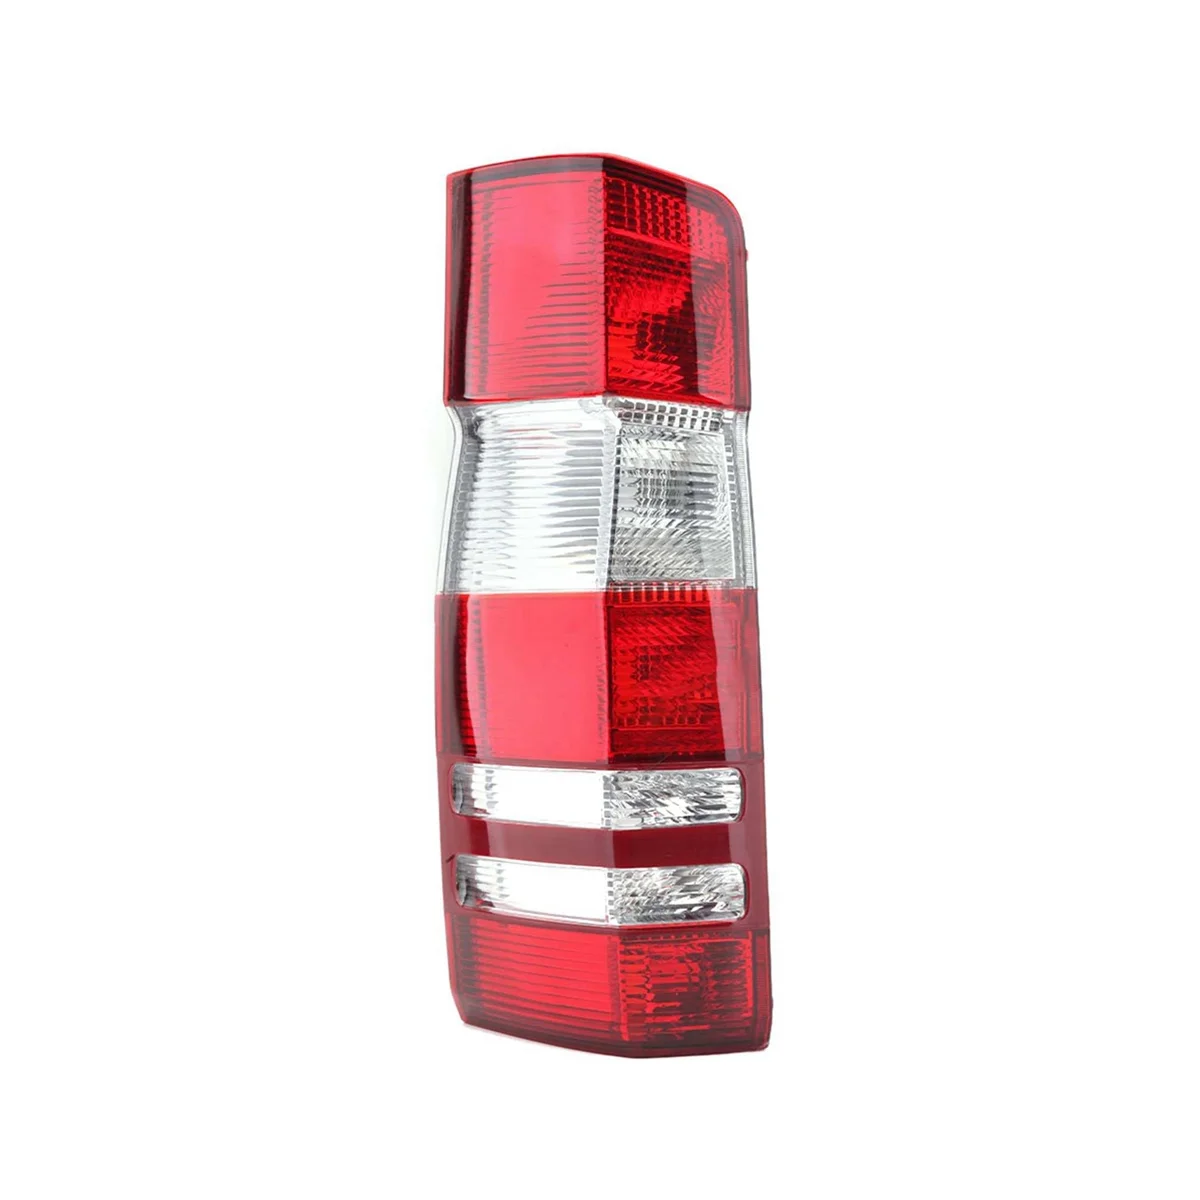 

9068200164 Brake Light Rear Left Stop Rear Tail Light Truck Tail Light Without Bulb Auto for Benz Sprinter 2006-2017